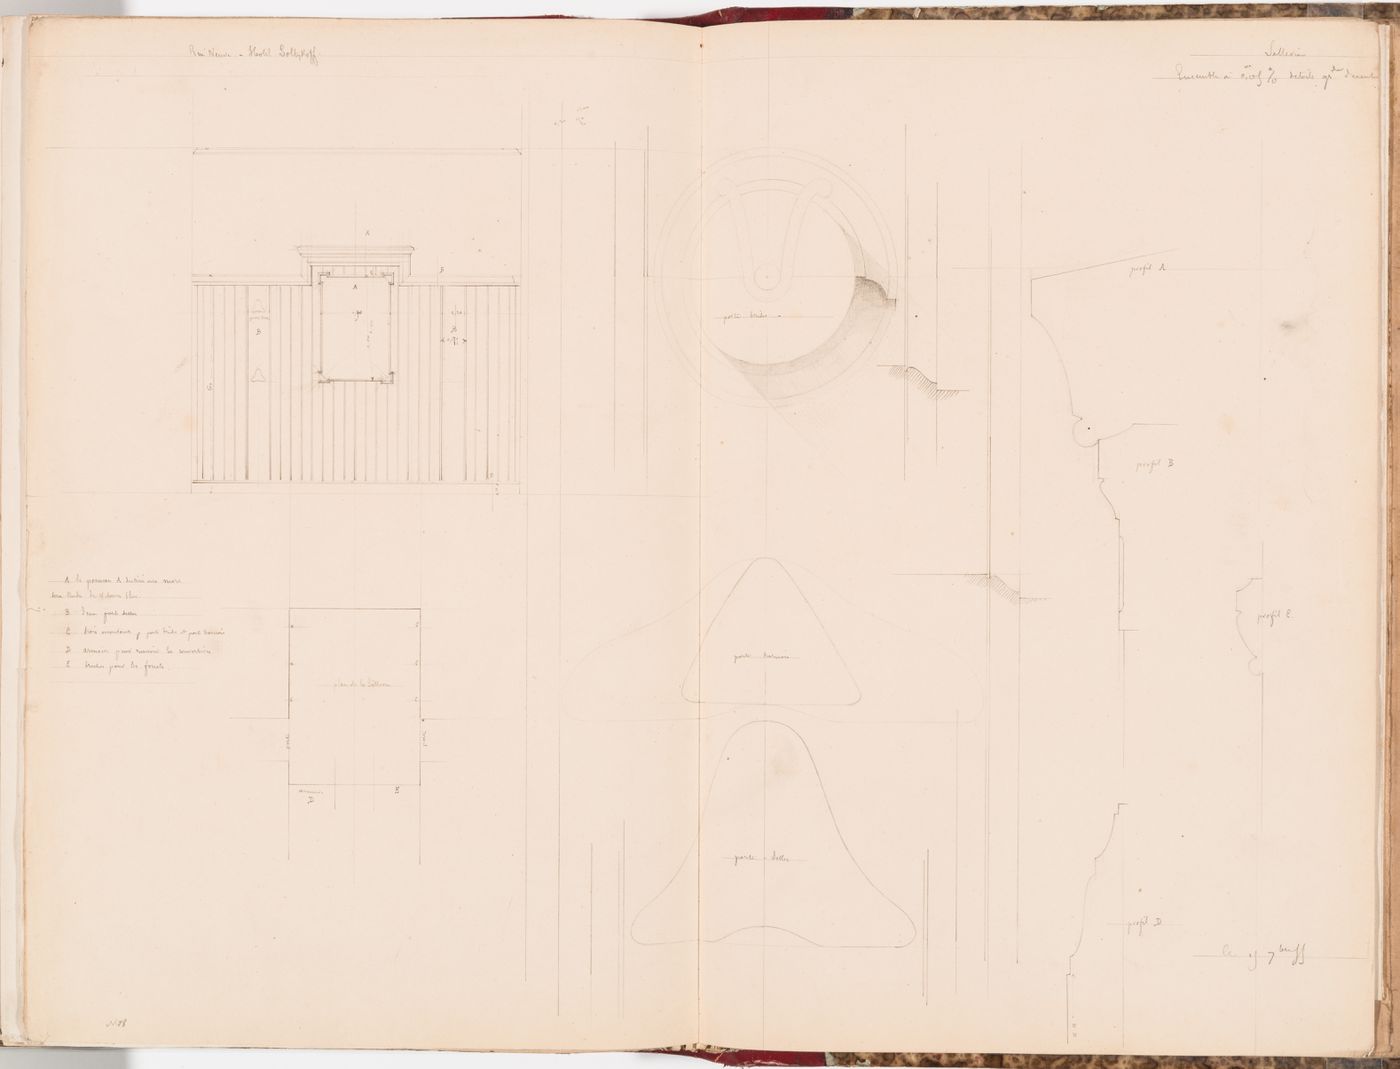 Elevation, plan, details, and moulding profiles for the door for the tack room, Hôtel Soltykoff